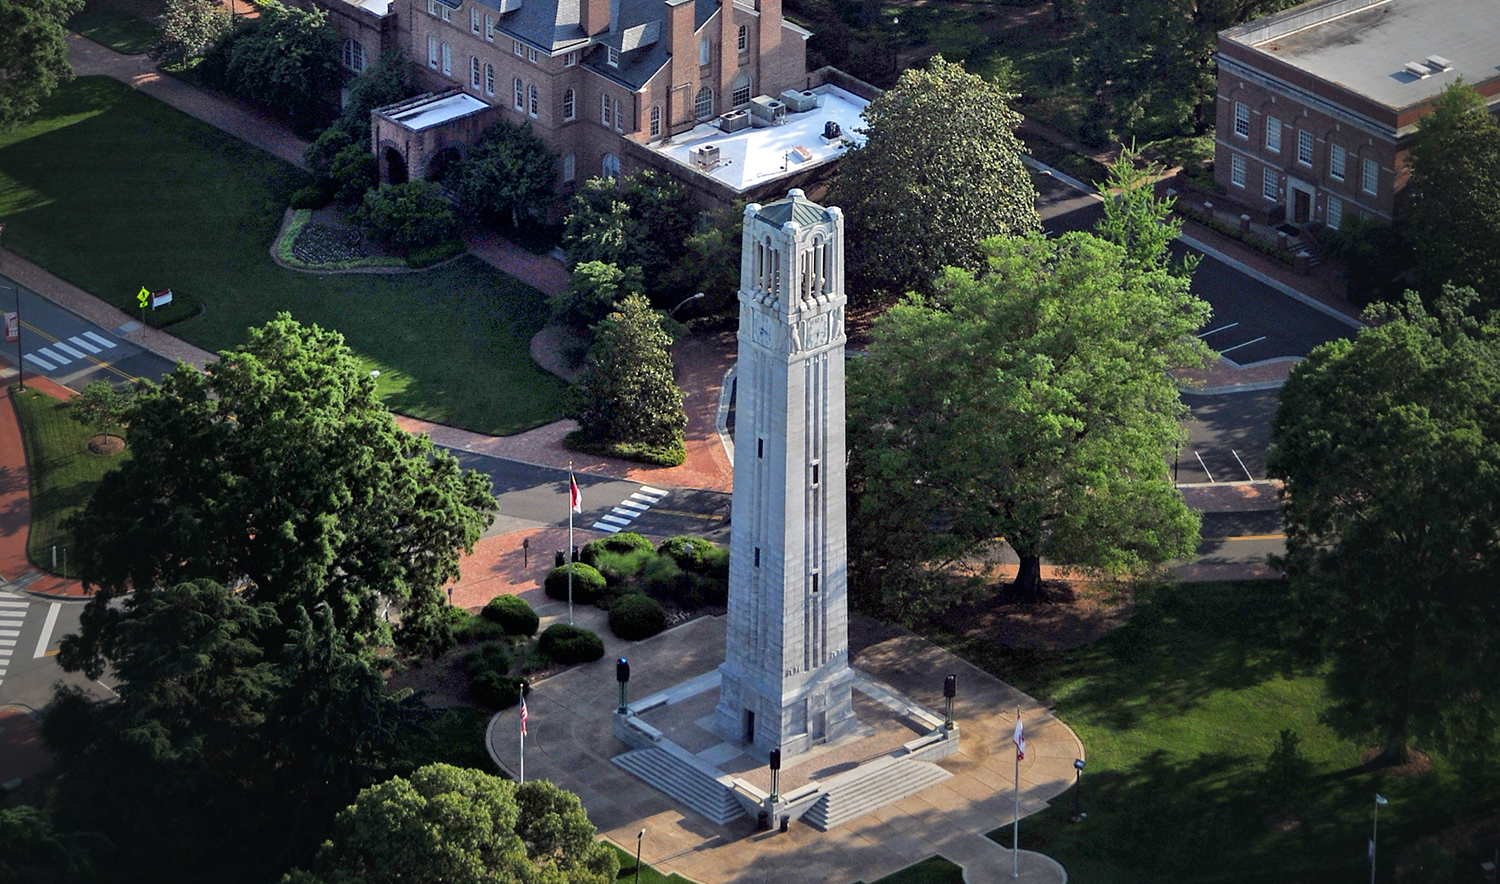 The Belltower as seen from above.